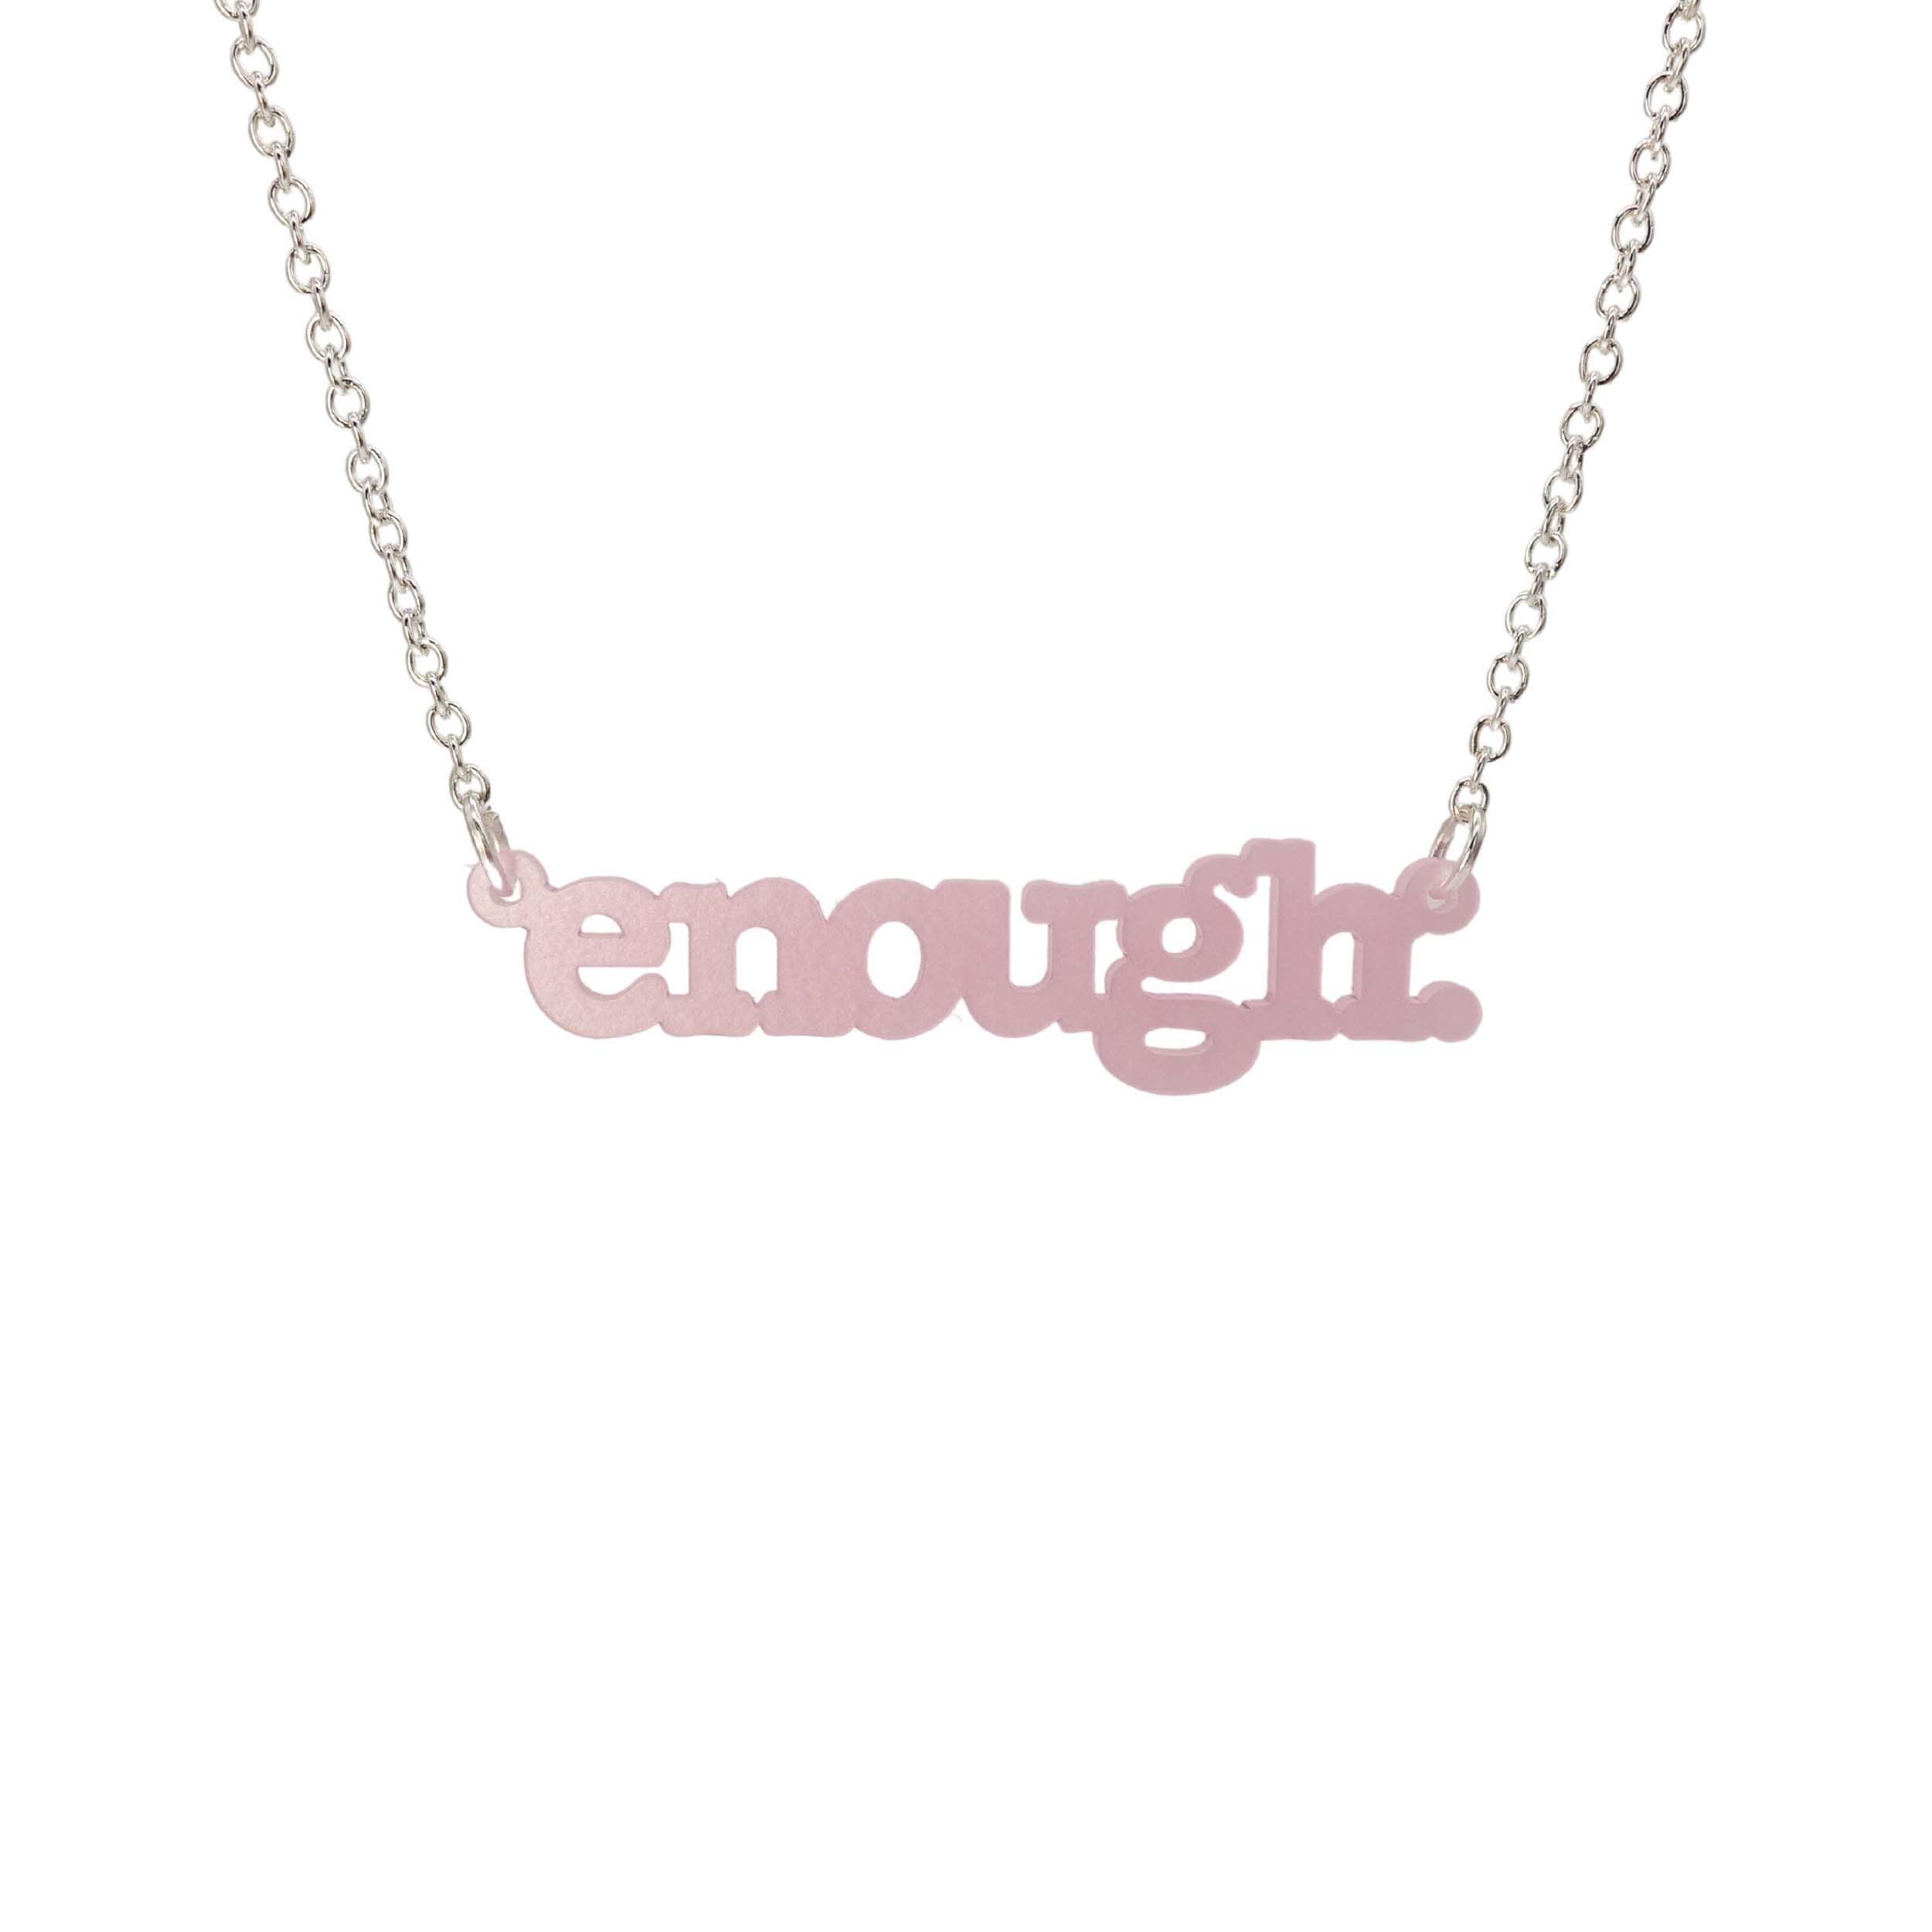 Shell pink Enough necklace shown hanging on a silver chain against a white background. 